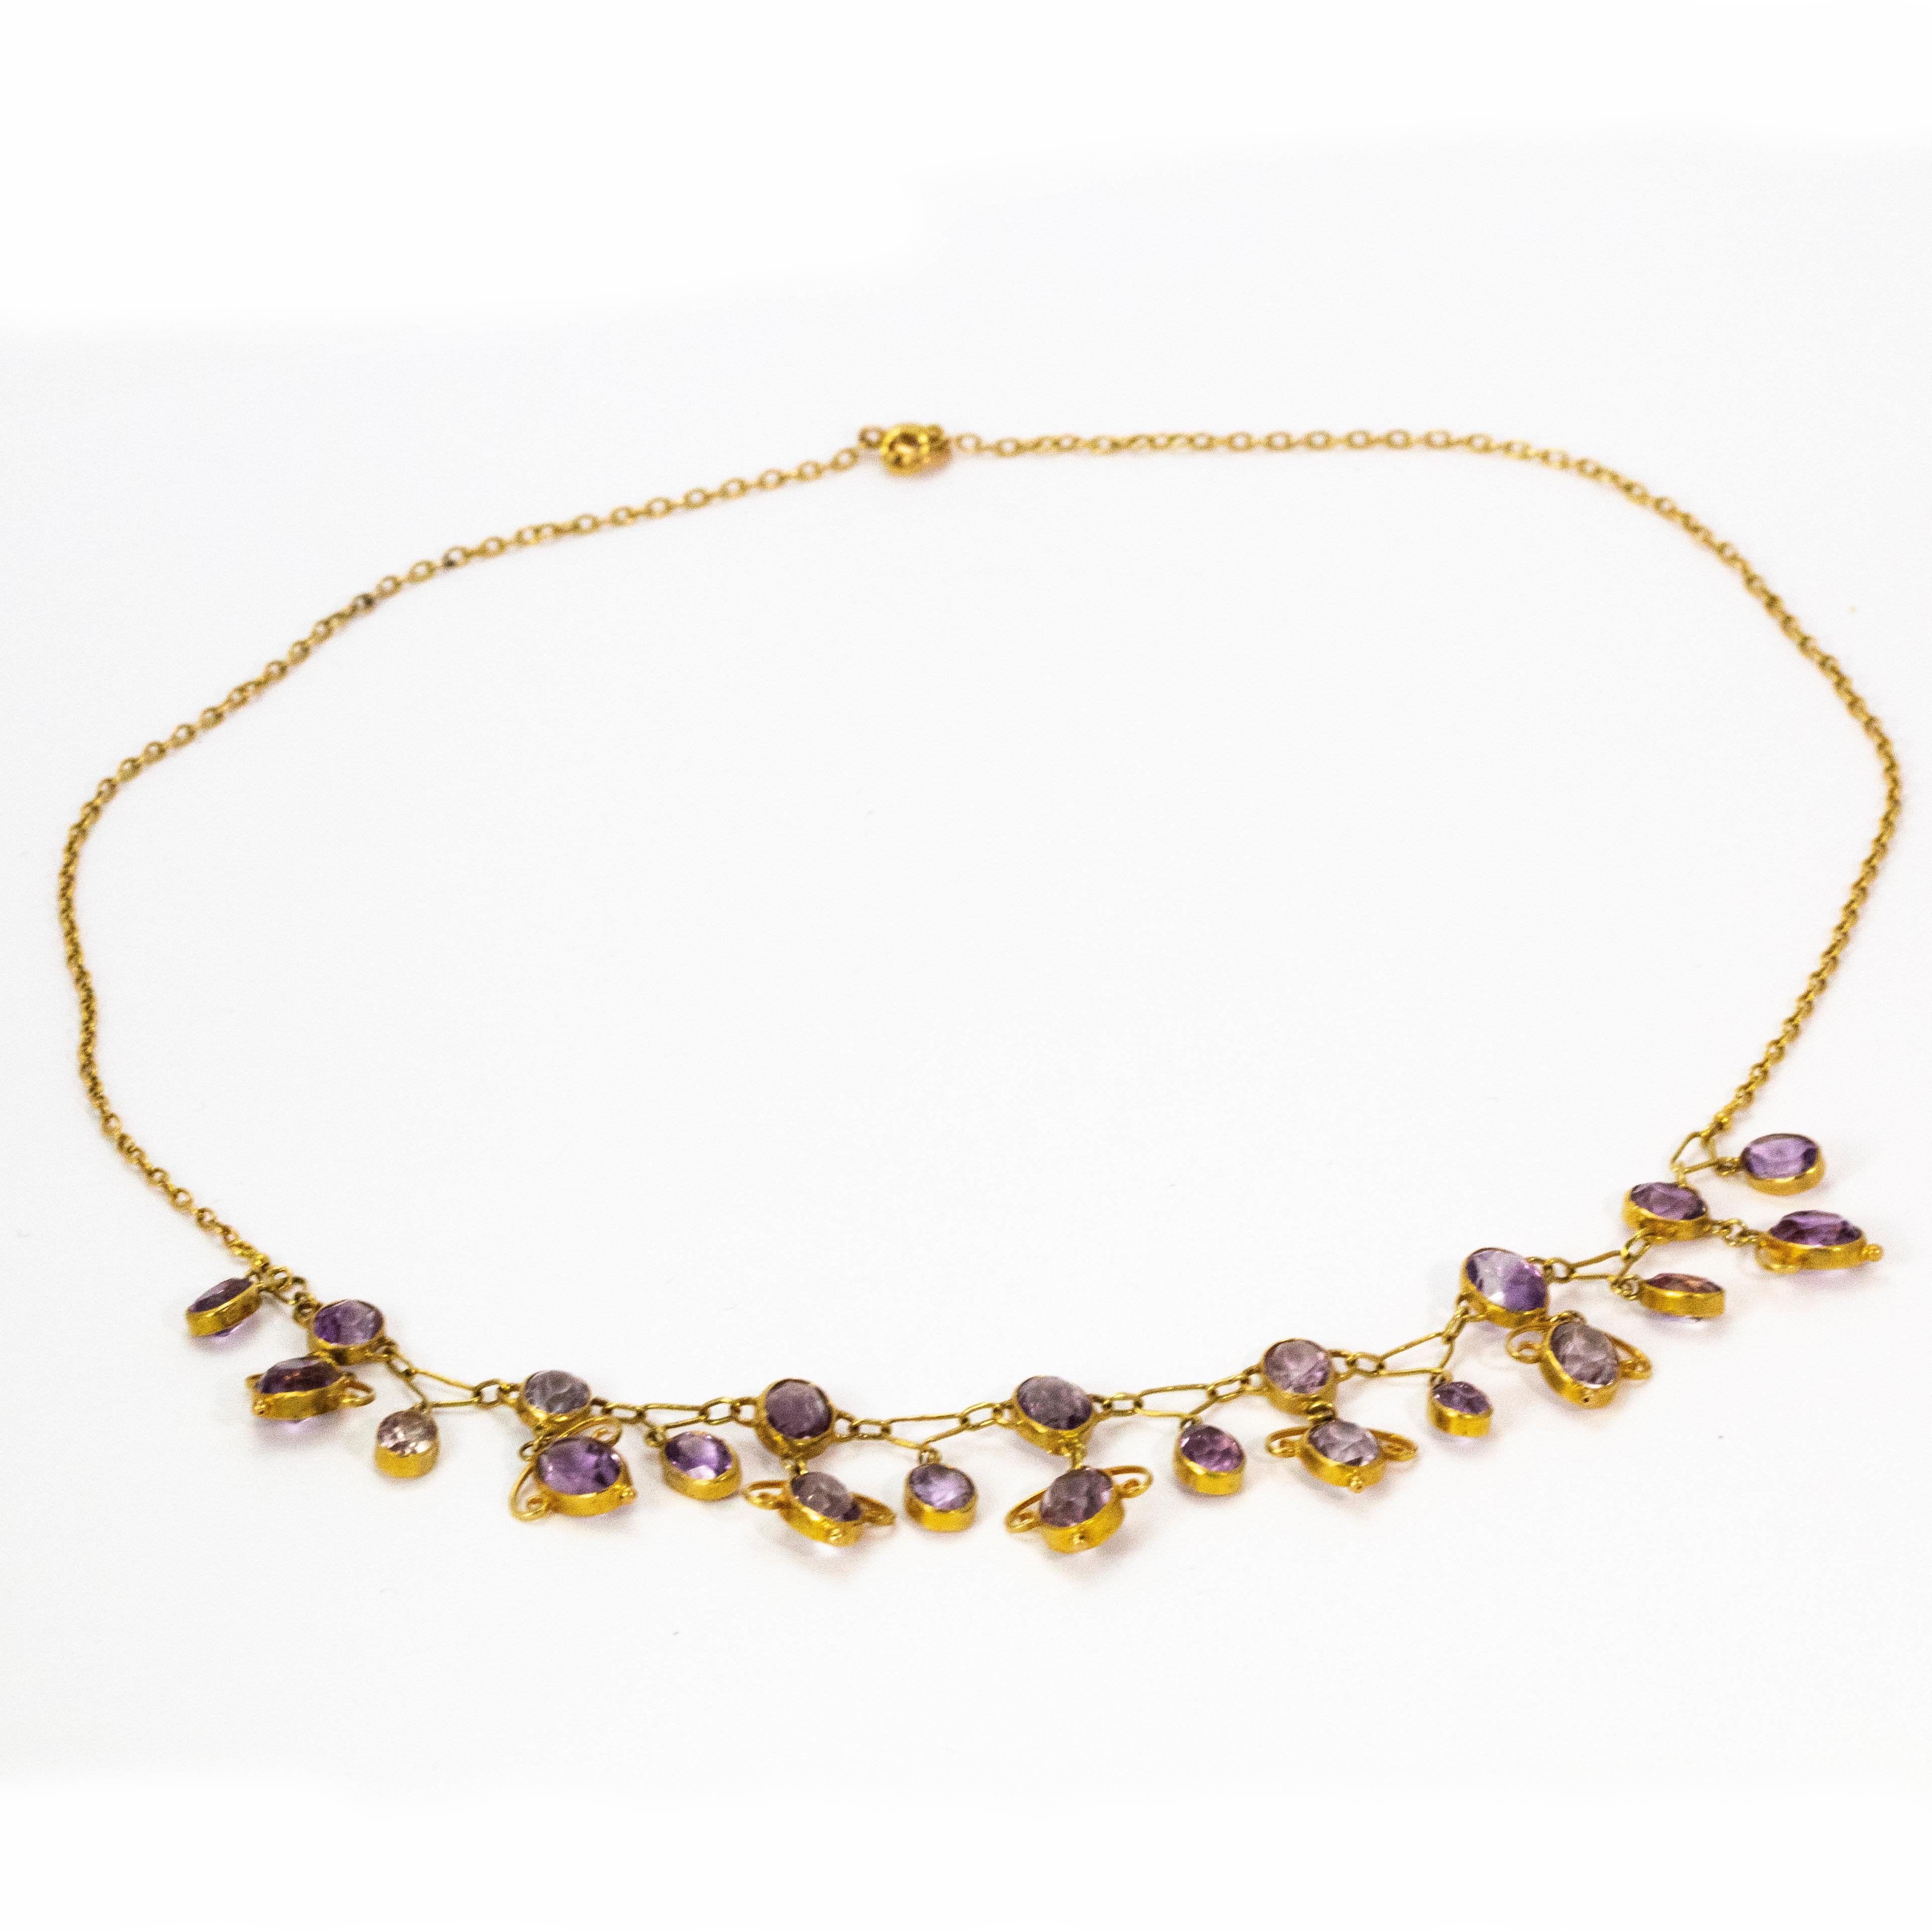 A spectacular Art Nouveau necklace by Liberty & Co. circa 1910. Set with wonderful double and single amethyst drops all in fine ornate settings. Modelled in 15 karat yellow gold.

Chain Length: 42cm